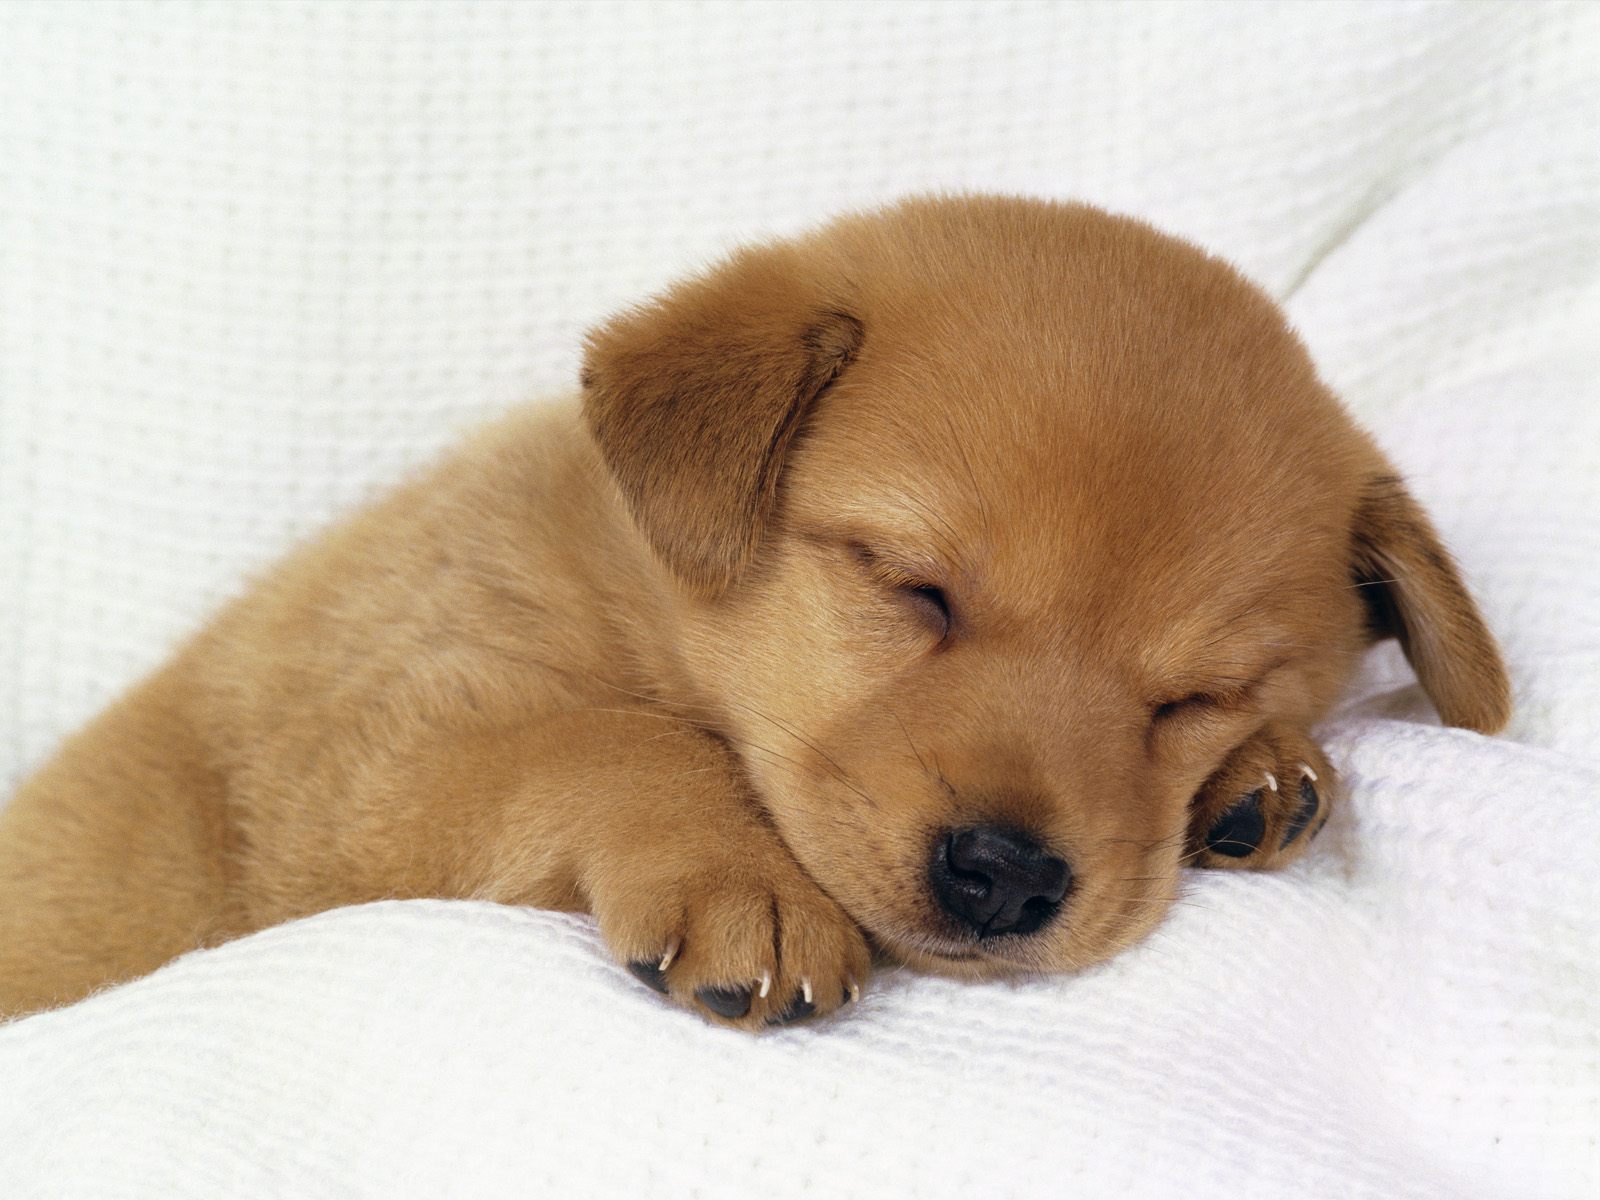 edge-of-the-plank-cute-animals-puppies